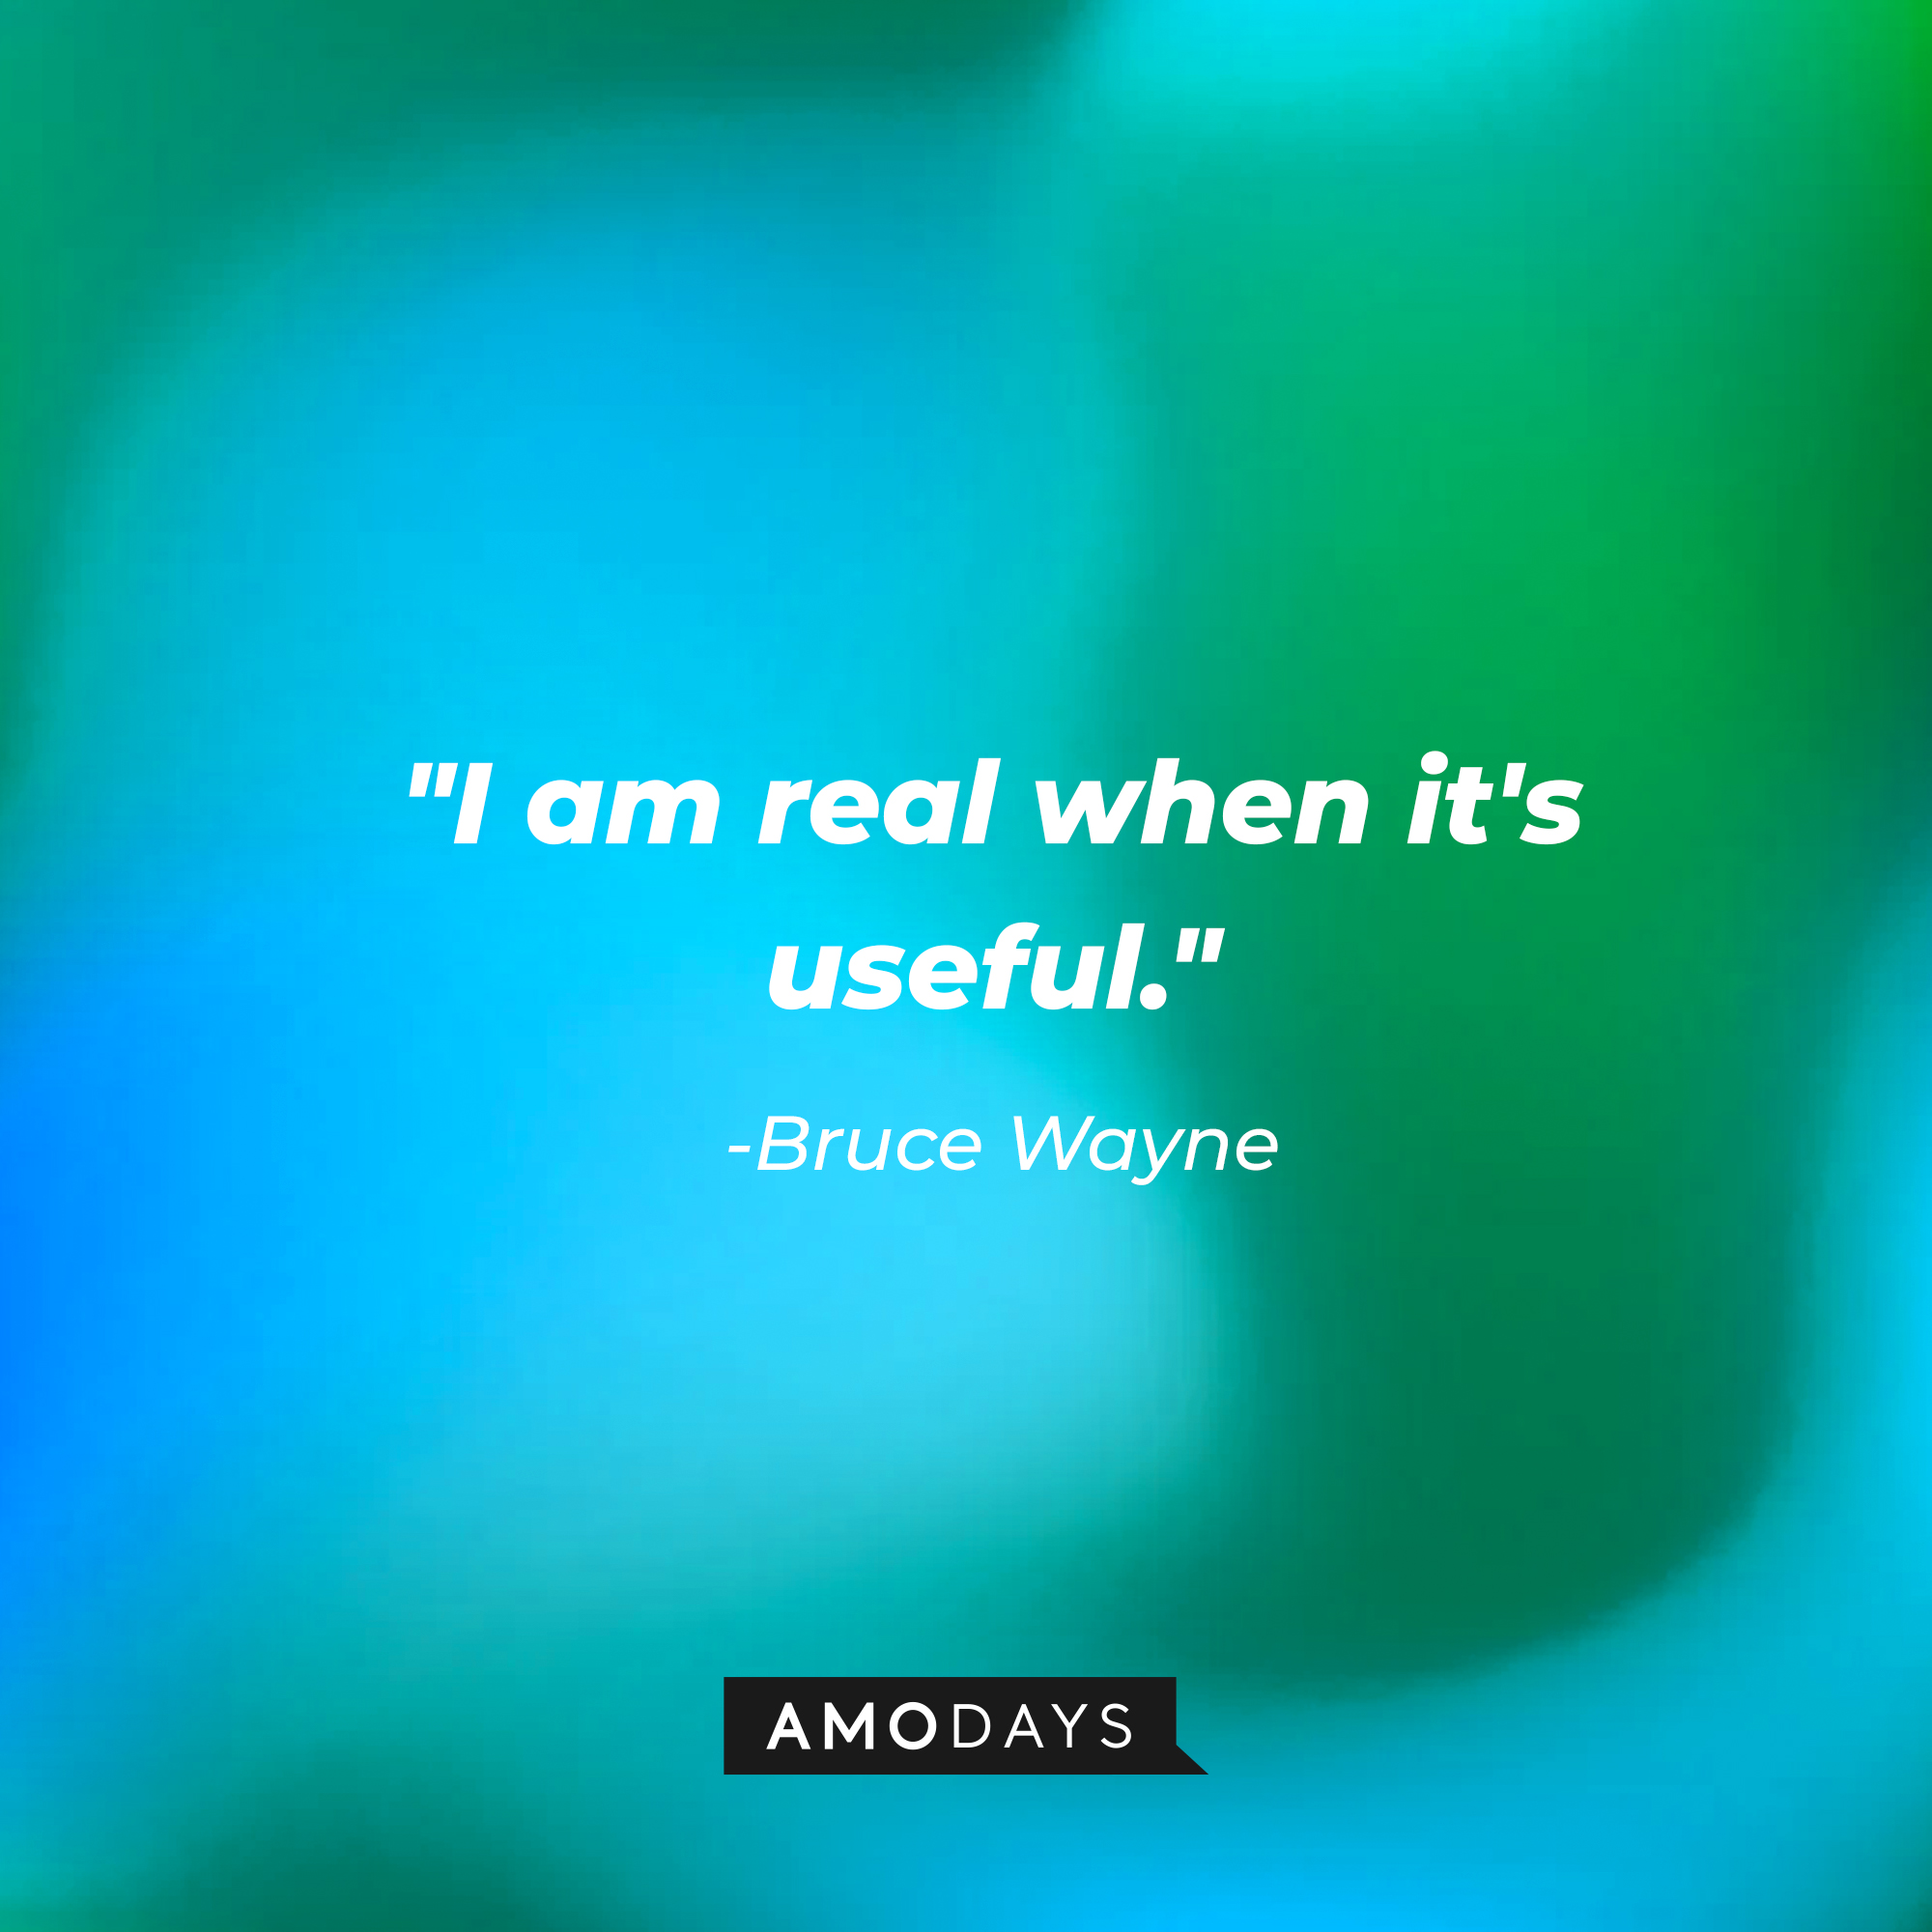 Bruce Wayne's quote, "I am real when it's useful." | Source: AmoDays